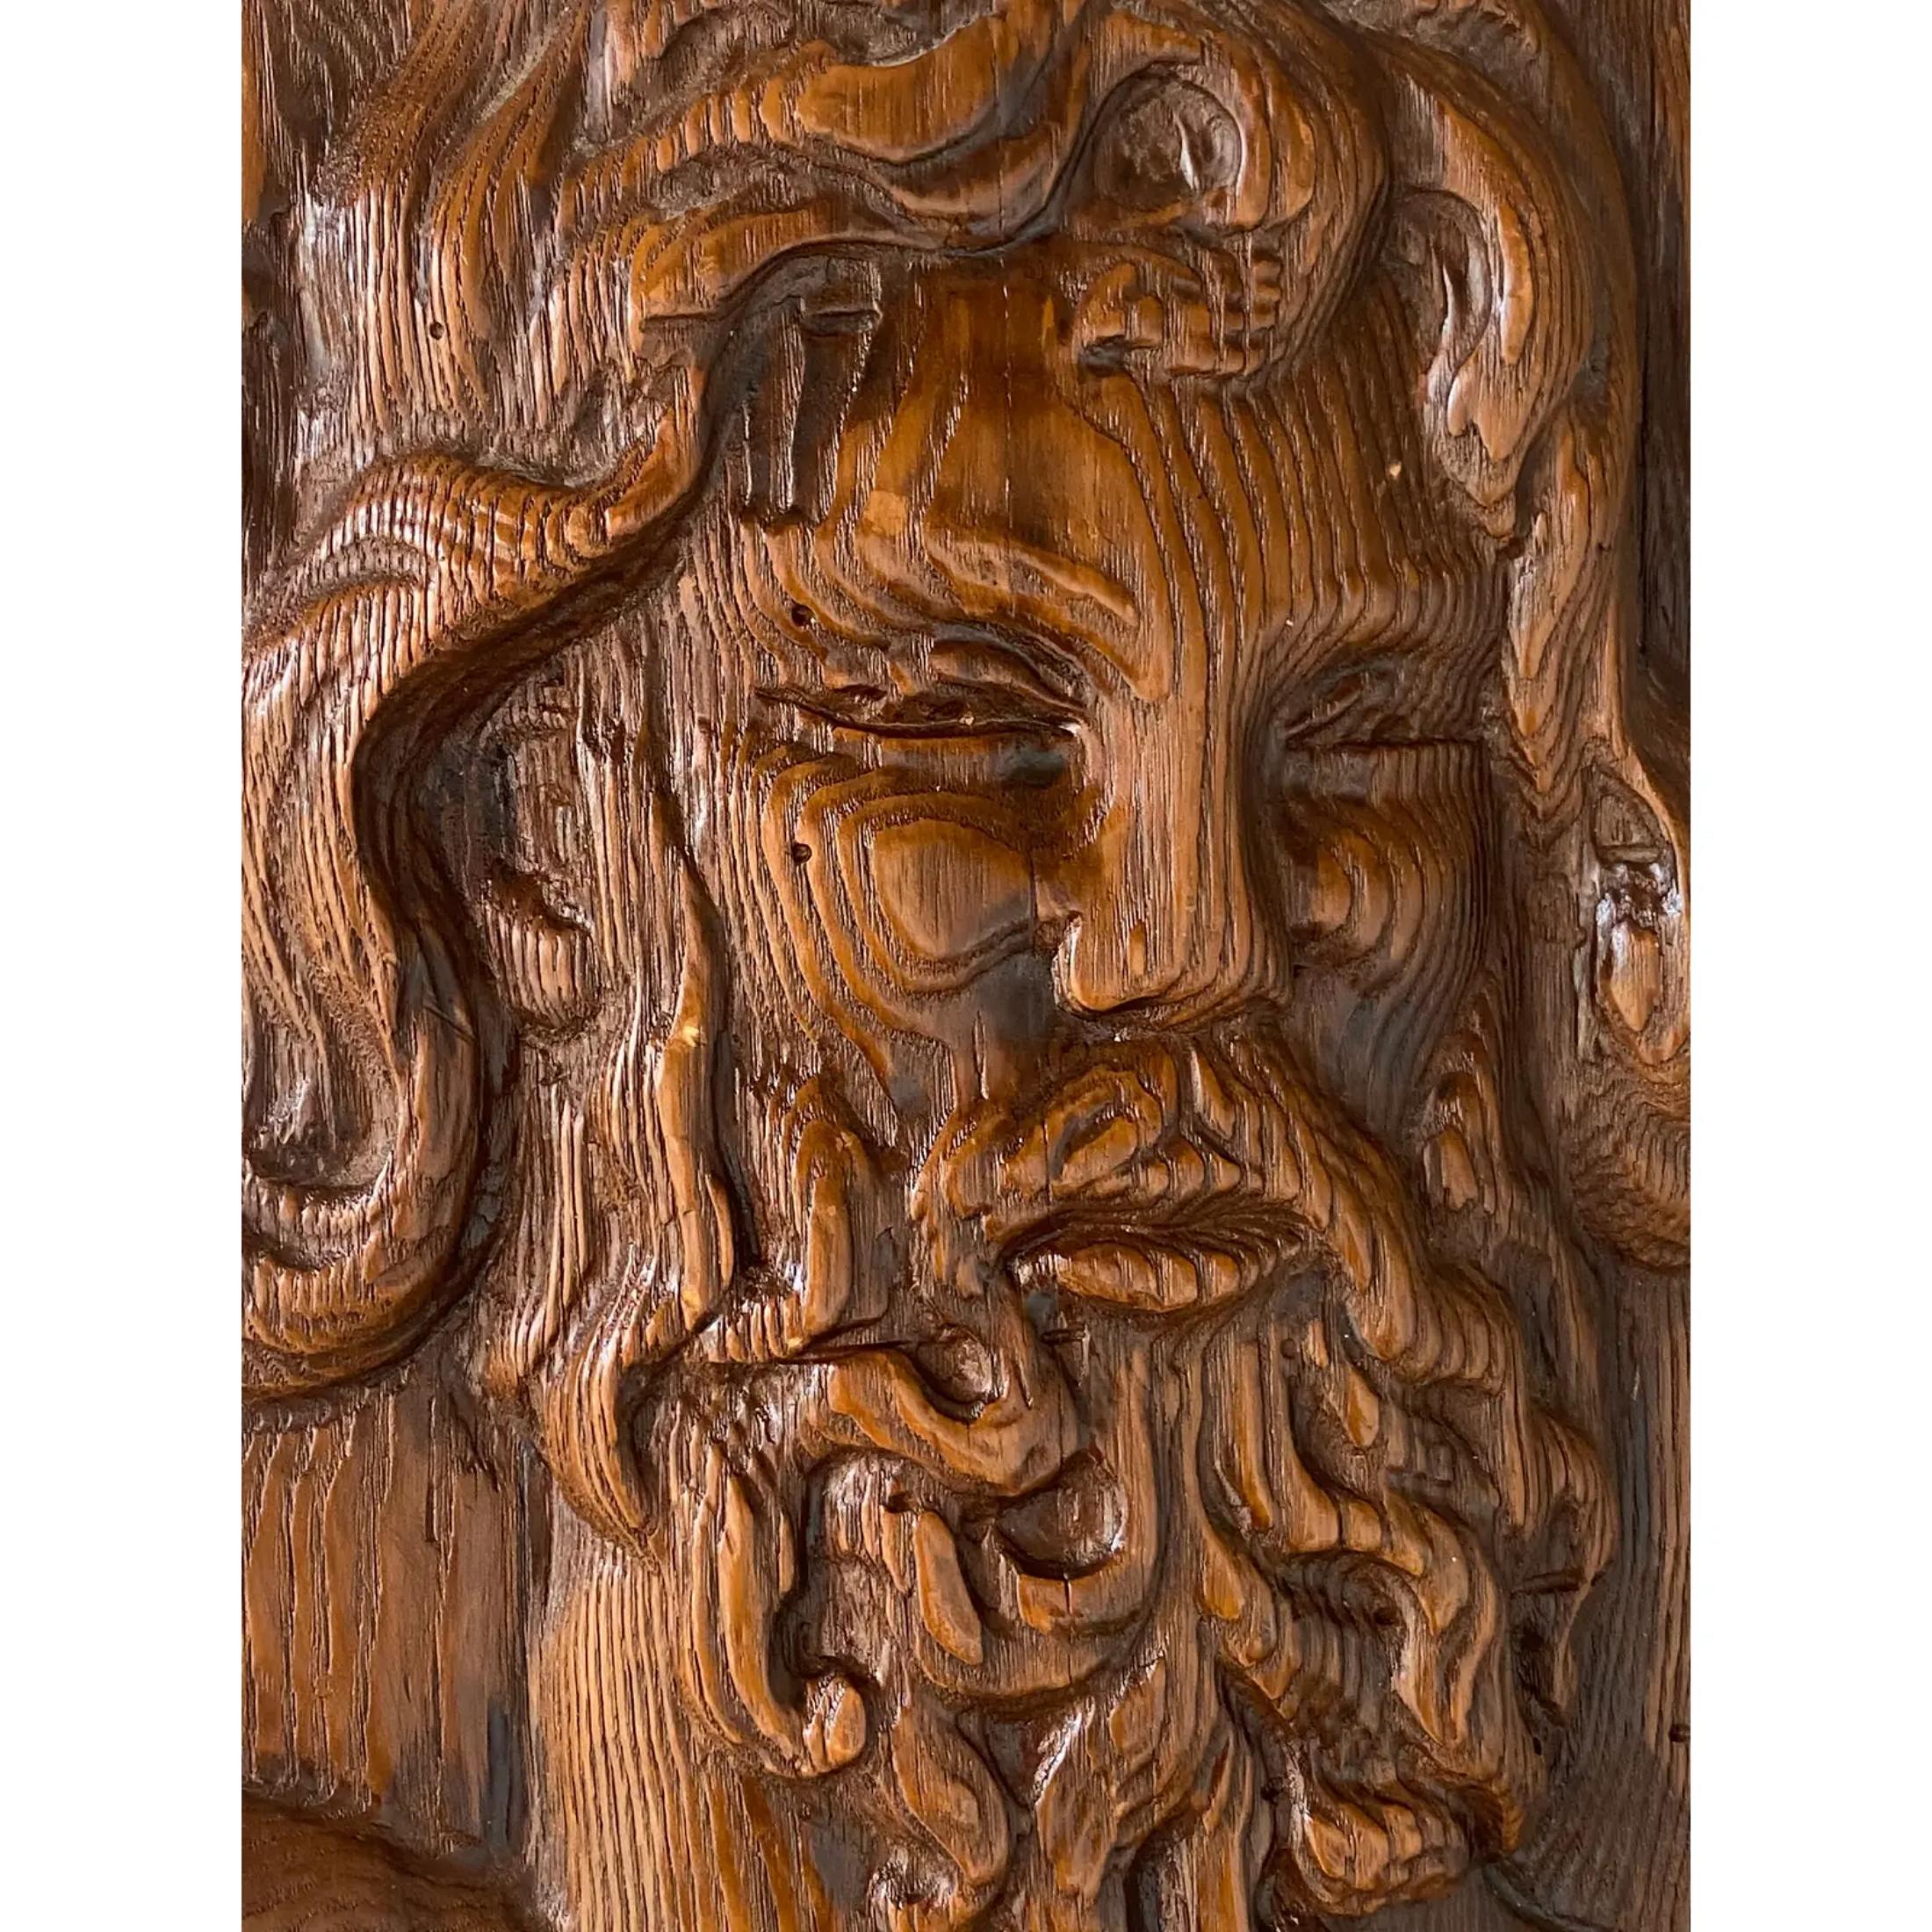 Outstanding vintage Boho hand carved wooden relief. A handsome composition of a bearded man. Signed on the bottom right. Acquired from a Palm Beach estate